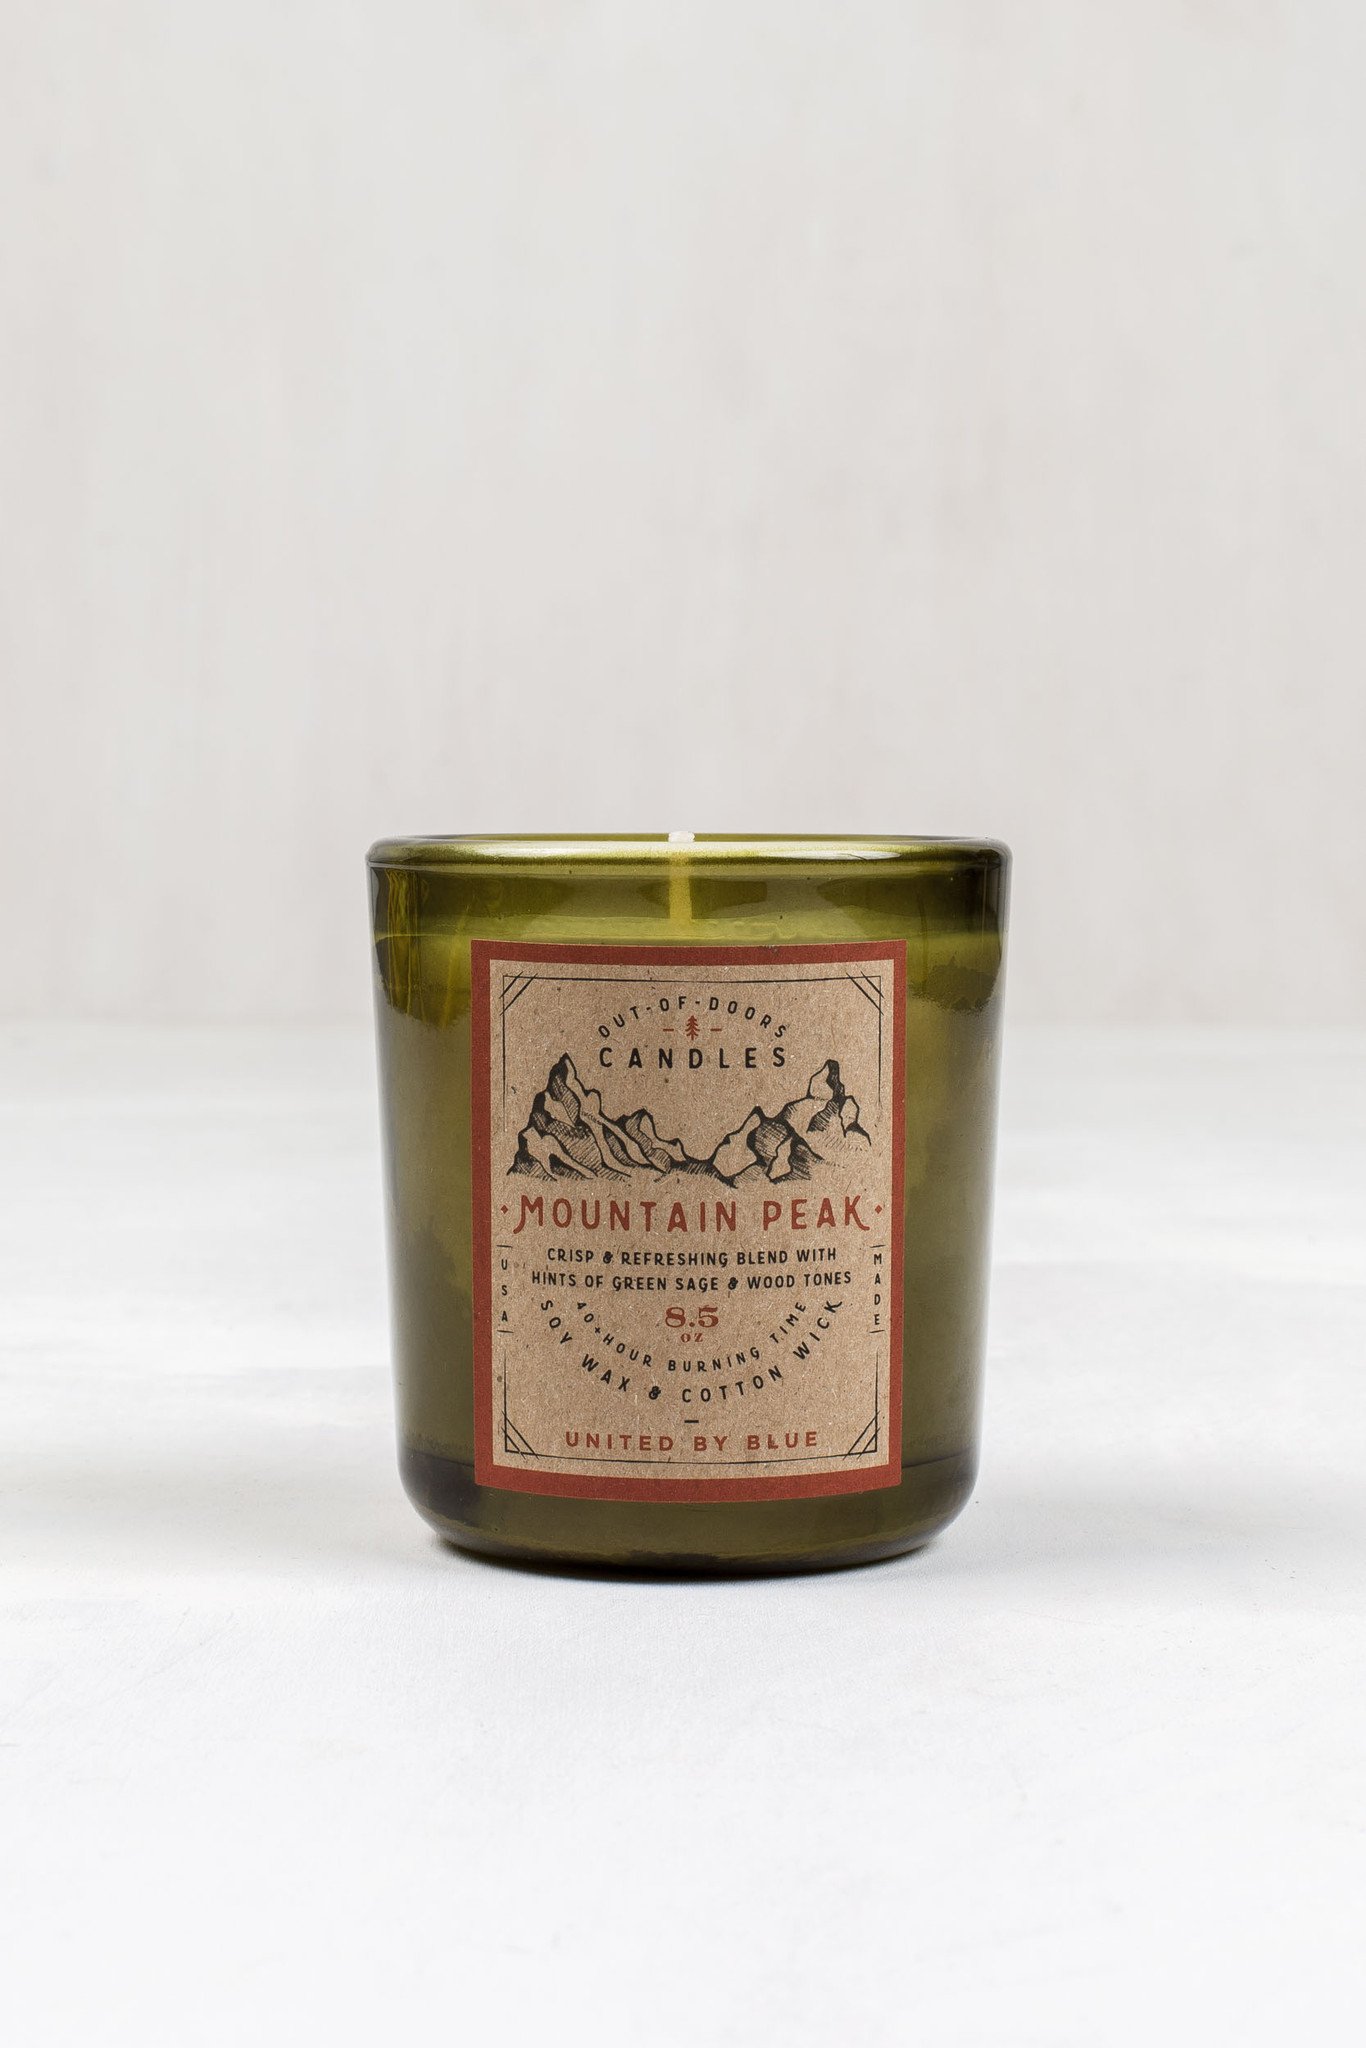 8.5 oz. Mountain Peak Out-of-Doors Candle | United By Blue